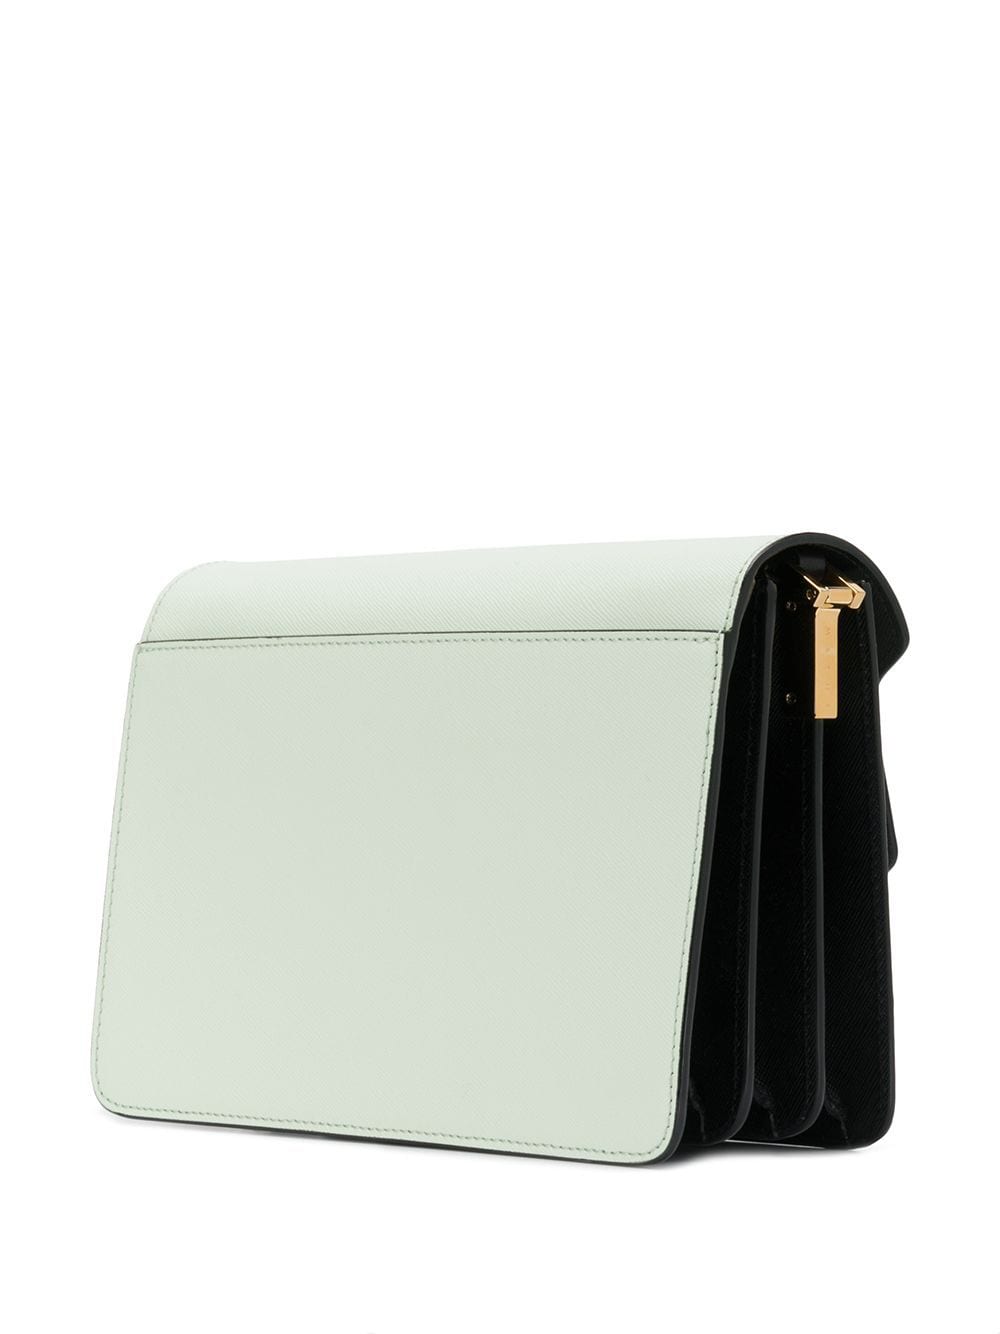 white and mint green calf leather Trunk shoulder bag